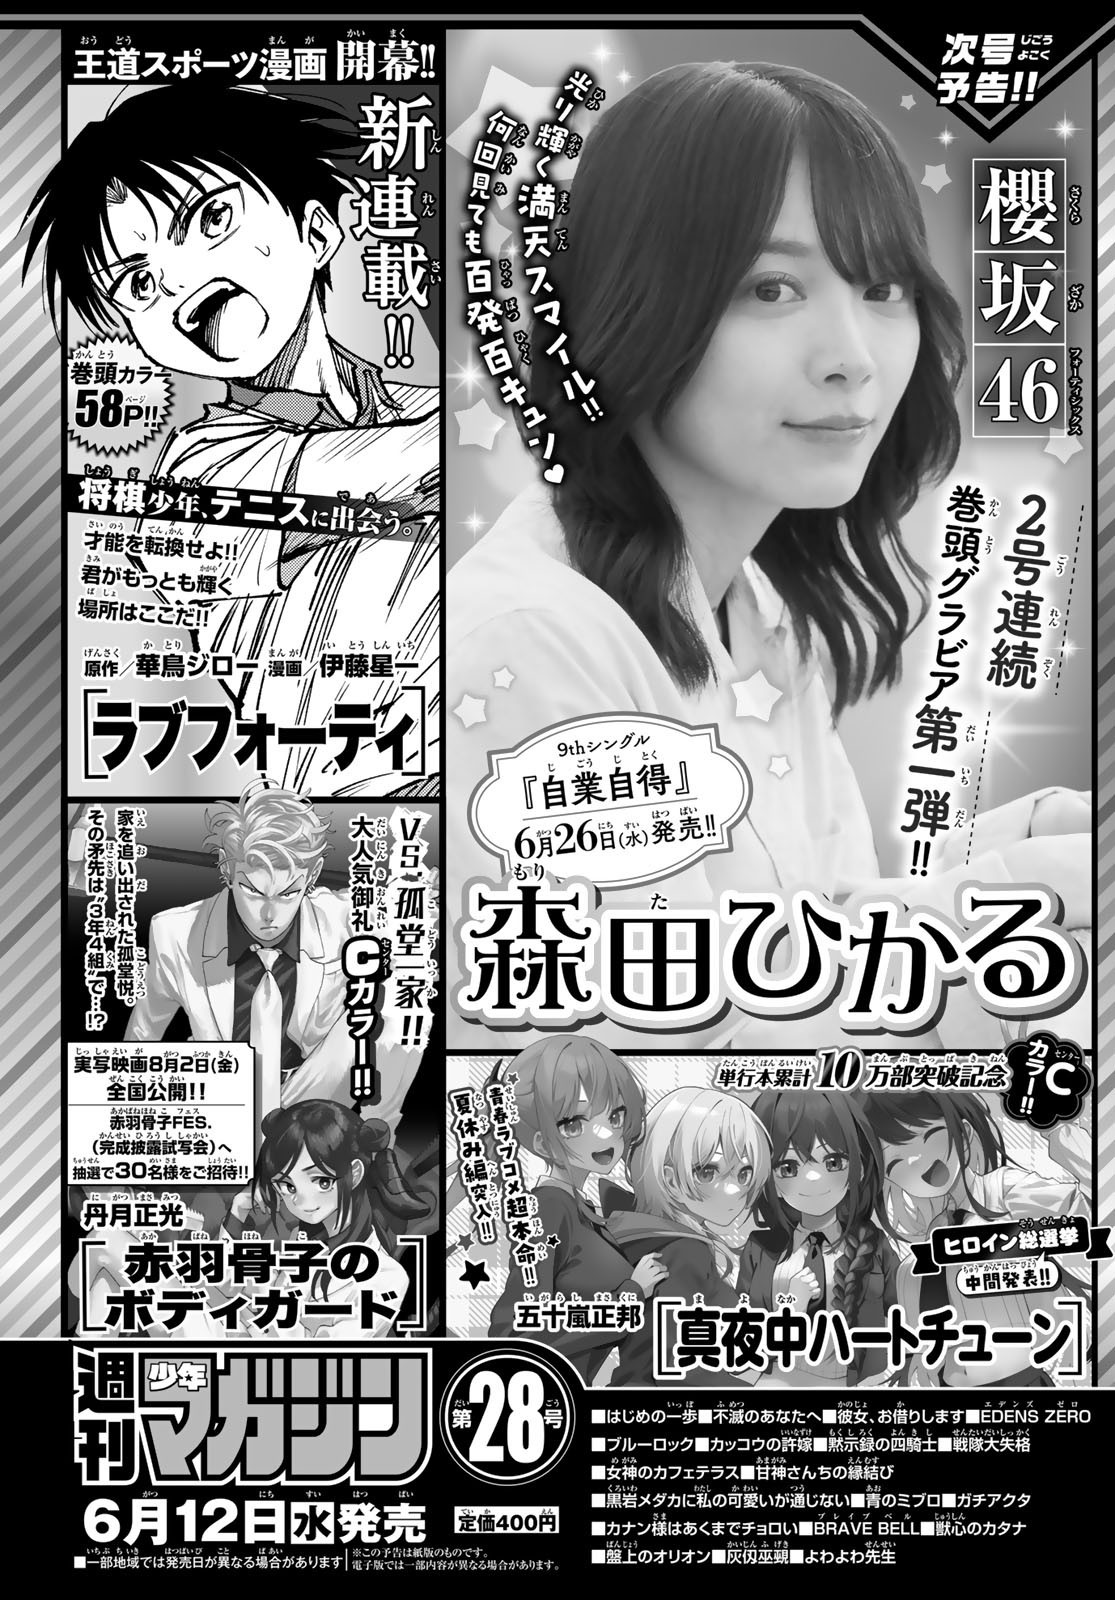 Weekly Shōnen Magazine - 週刊少年マガジン - Chapter 2024-27 - Page 428